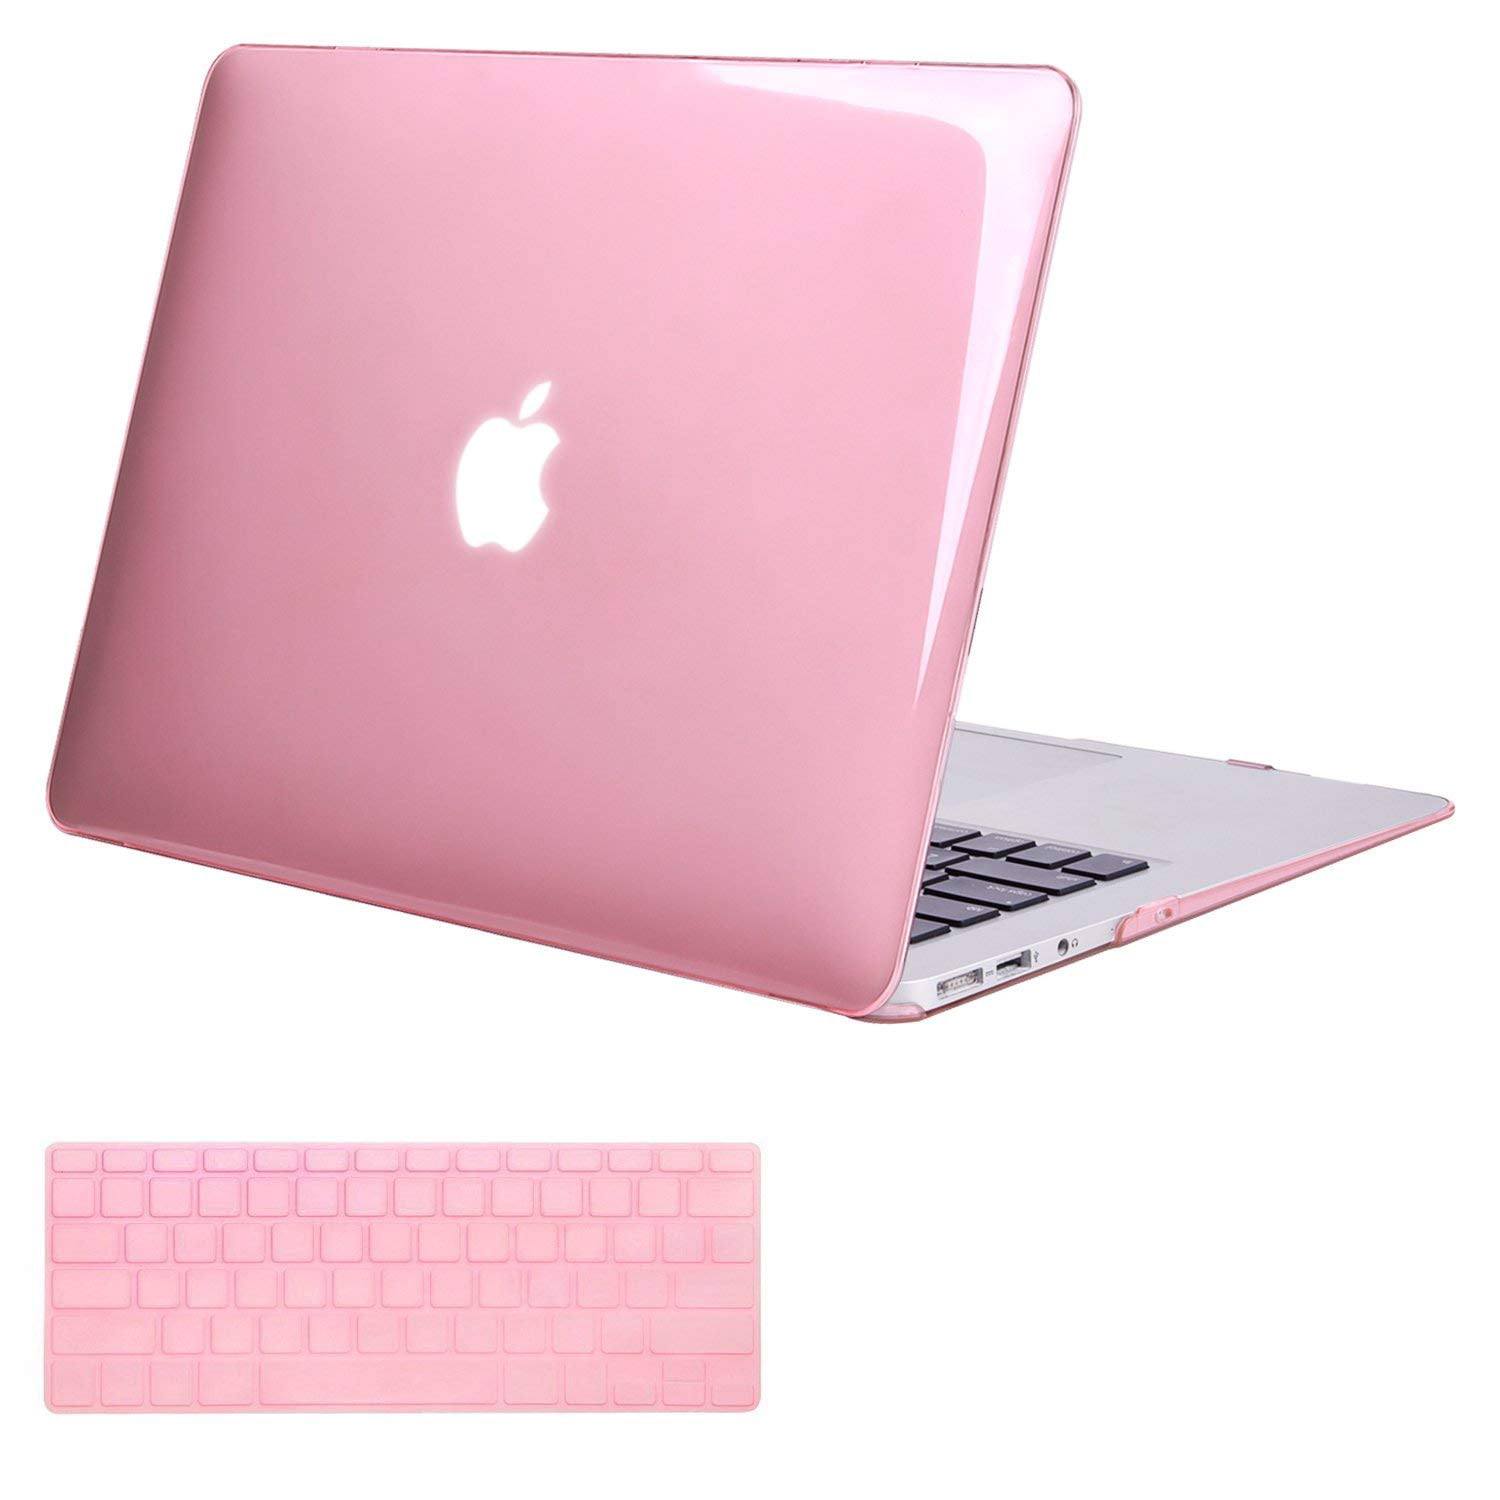 Crystal Hardcase Shell+Keyboard Cover For Apple Mac Macbook Air 11" A1370 A1465 